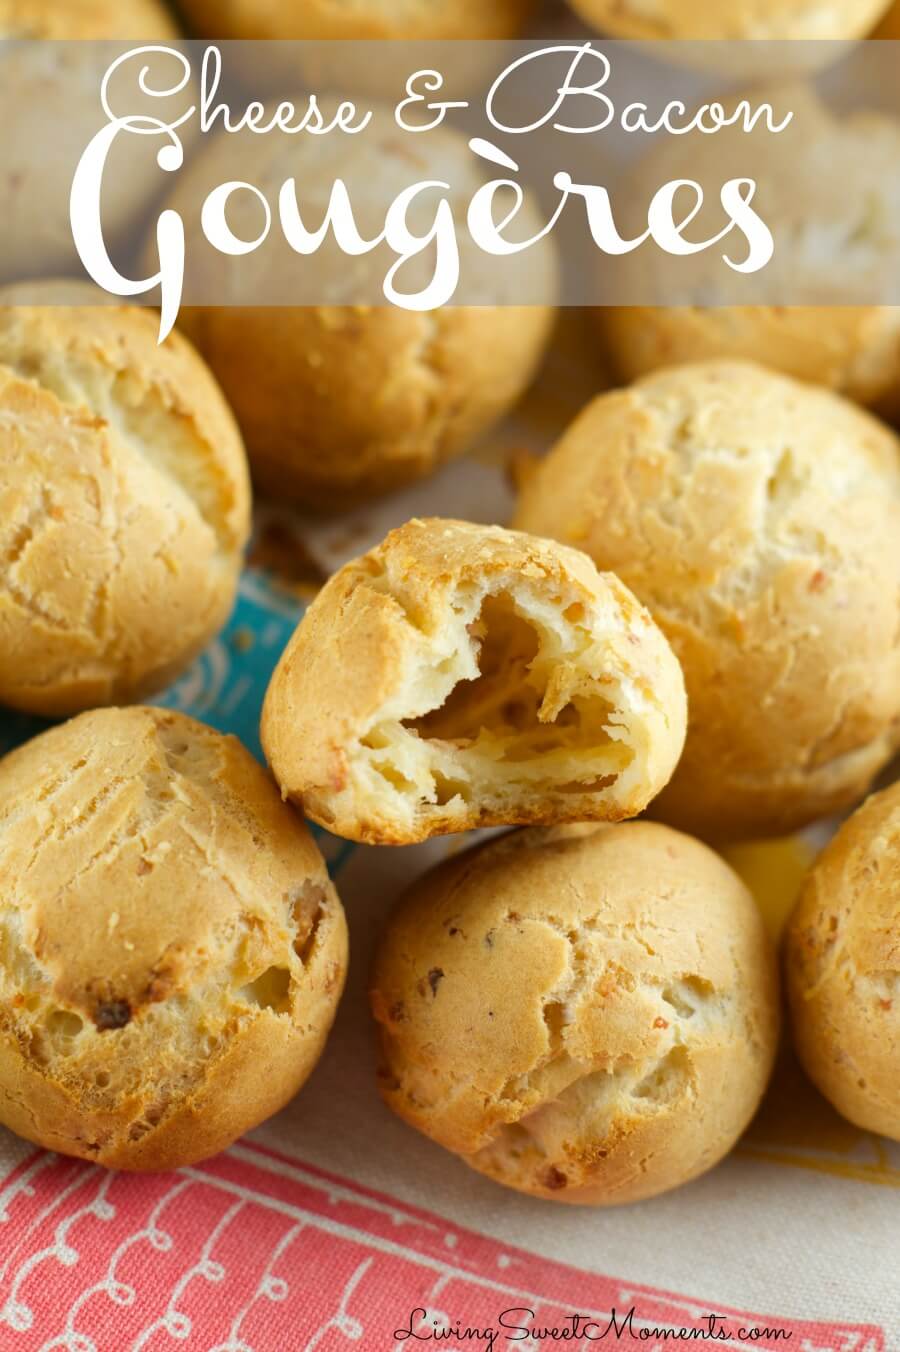 cheese and bacon gougeres